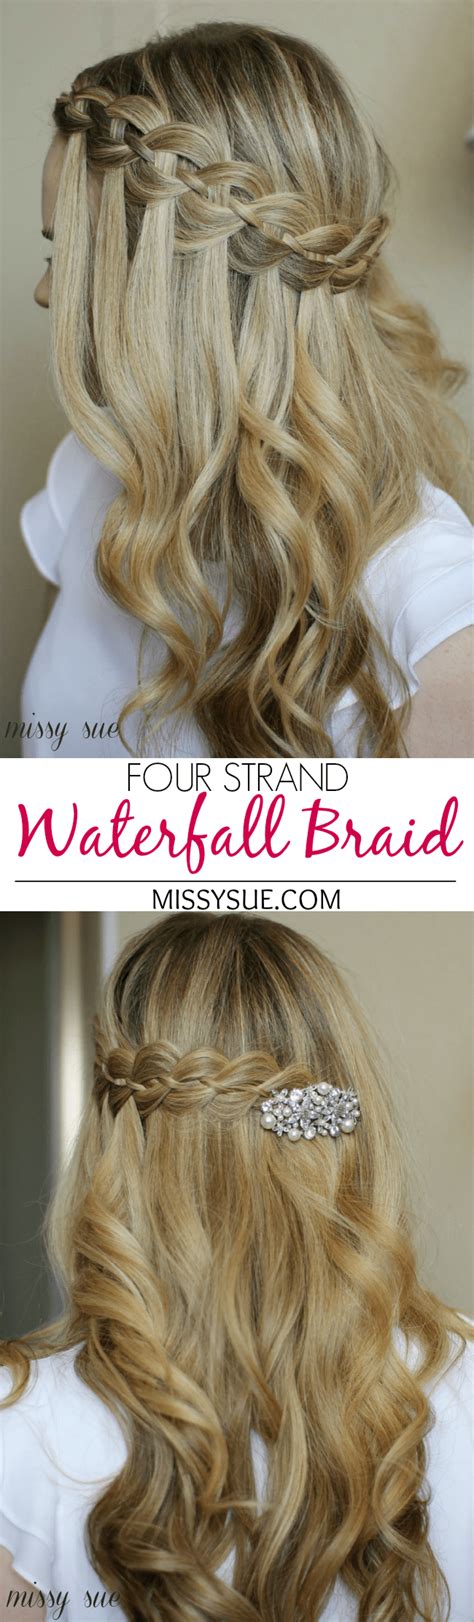 Waterfall braiding with two strands. Four Strand Waterfall Braid